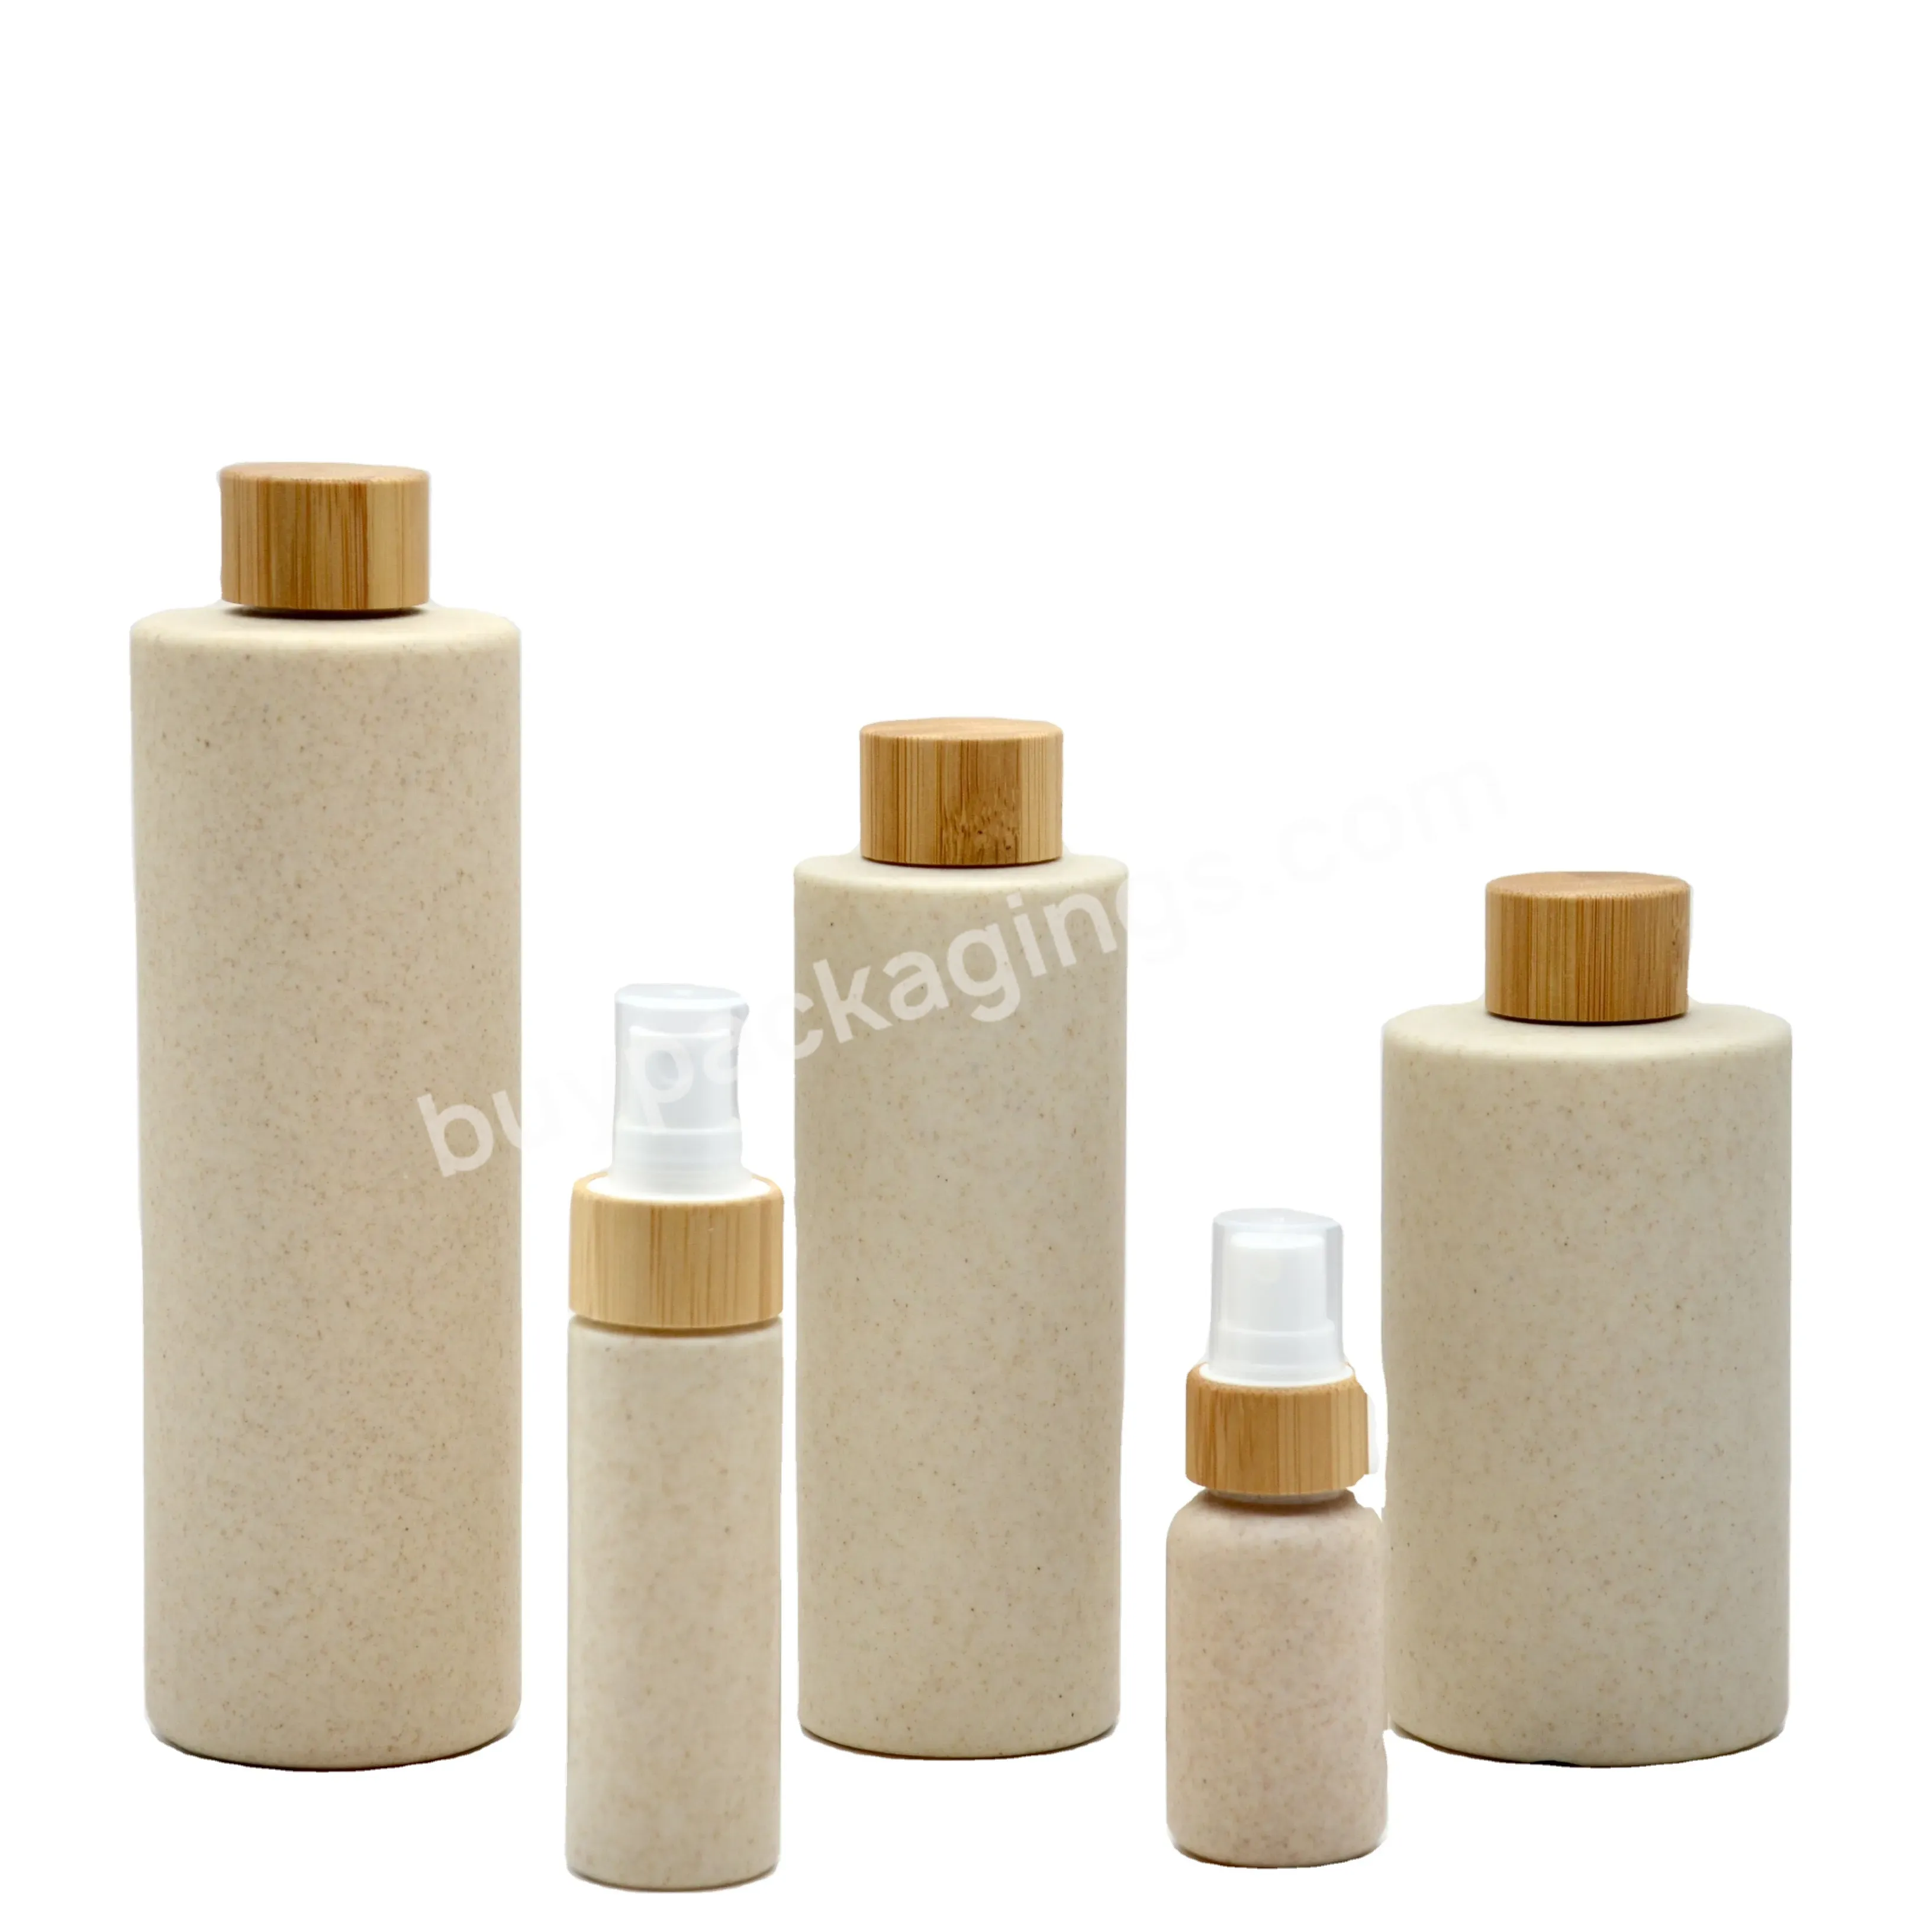 Biodegradable Cosmetic Container 300ml 400ml Wheat Straw Plastic Bottle With Lotion Dispenser Pump - Buy Biodegradable Containers For Cosmetics,Biodegradable Bottles For Cosmetics,Lotion Dispenser Pump Bottle.